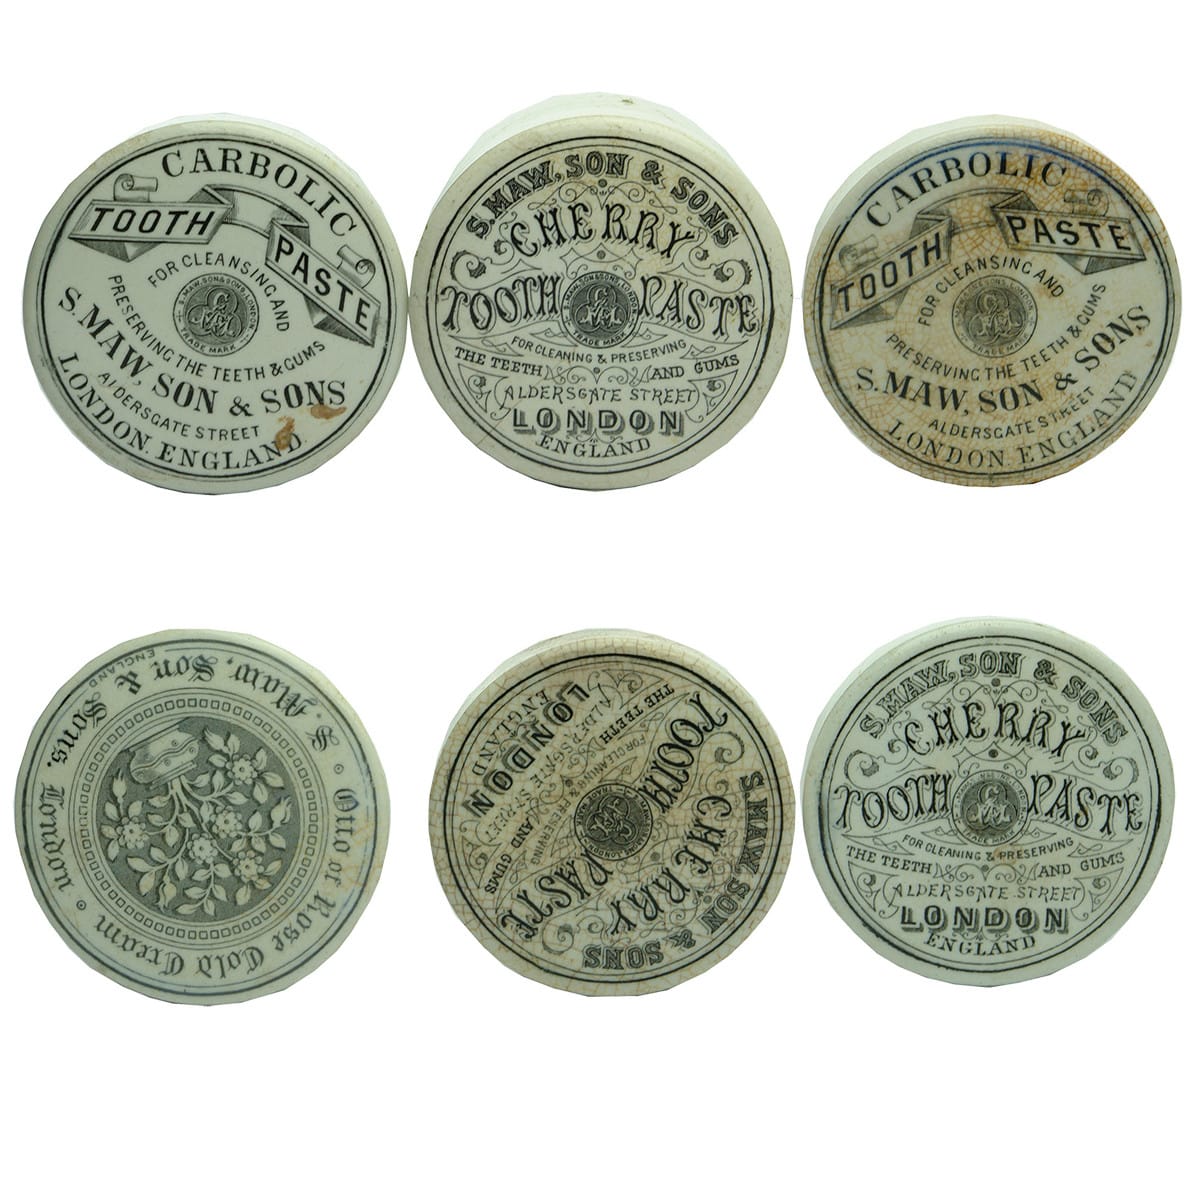 Six S. Maw Son & Sons Pot Lids. 3 x Cherry Tooth Paste; 2 x Carbolic Tooth Paste; 1 Otto of Rose Cold Cream.